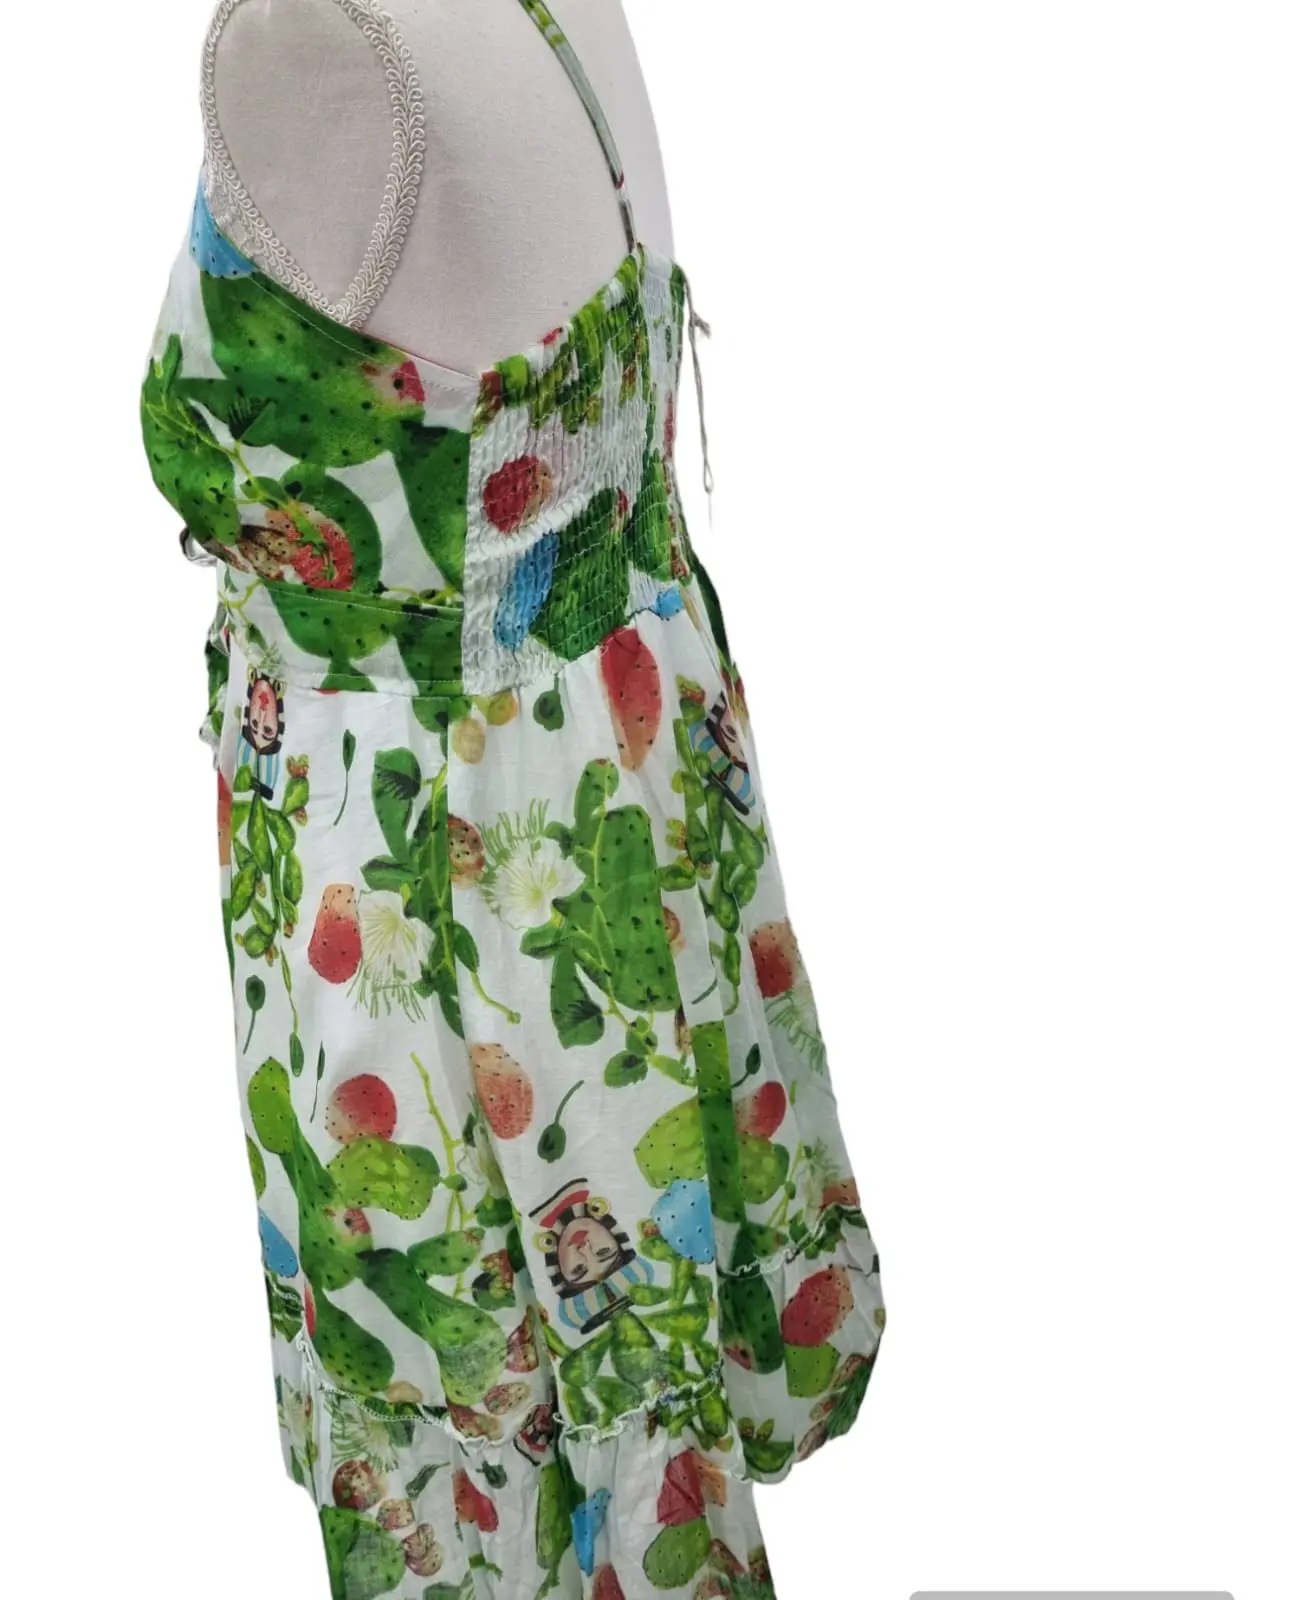 Short dress 100% cotton with adjustable straps, elasticated back. One sizePrickly pear pattern